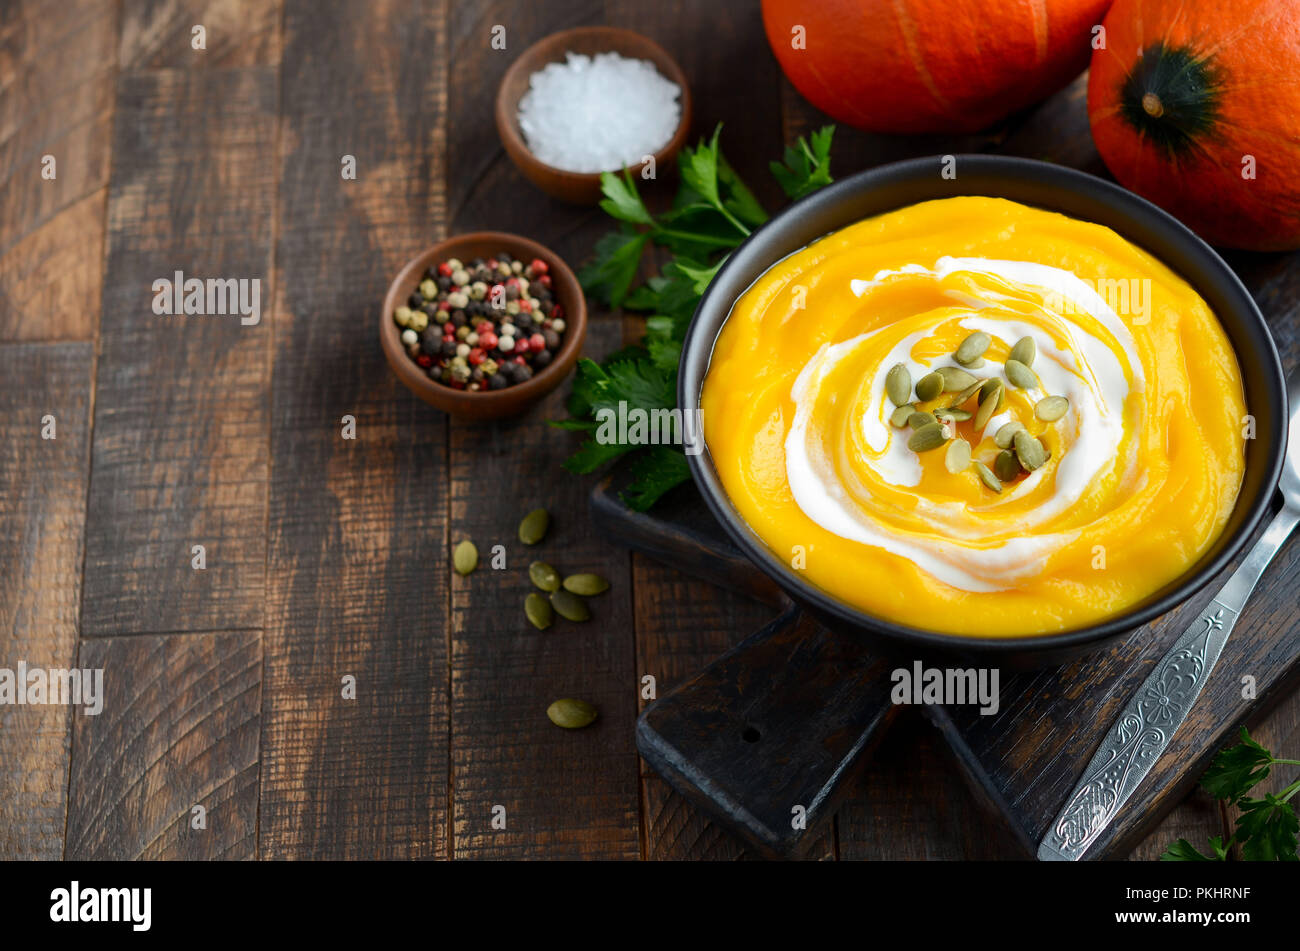 Pumpkin cream soup with cream and pumpkin seeds on rustic wooden table. Stock Photo